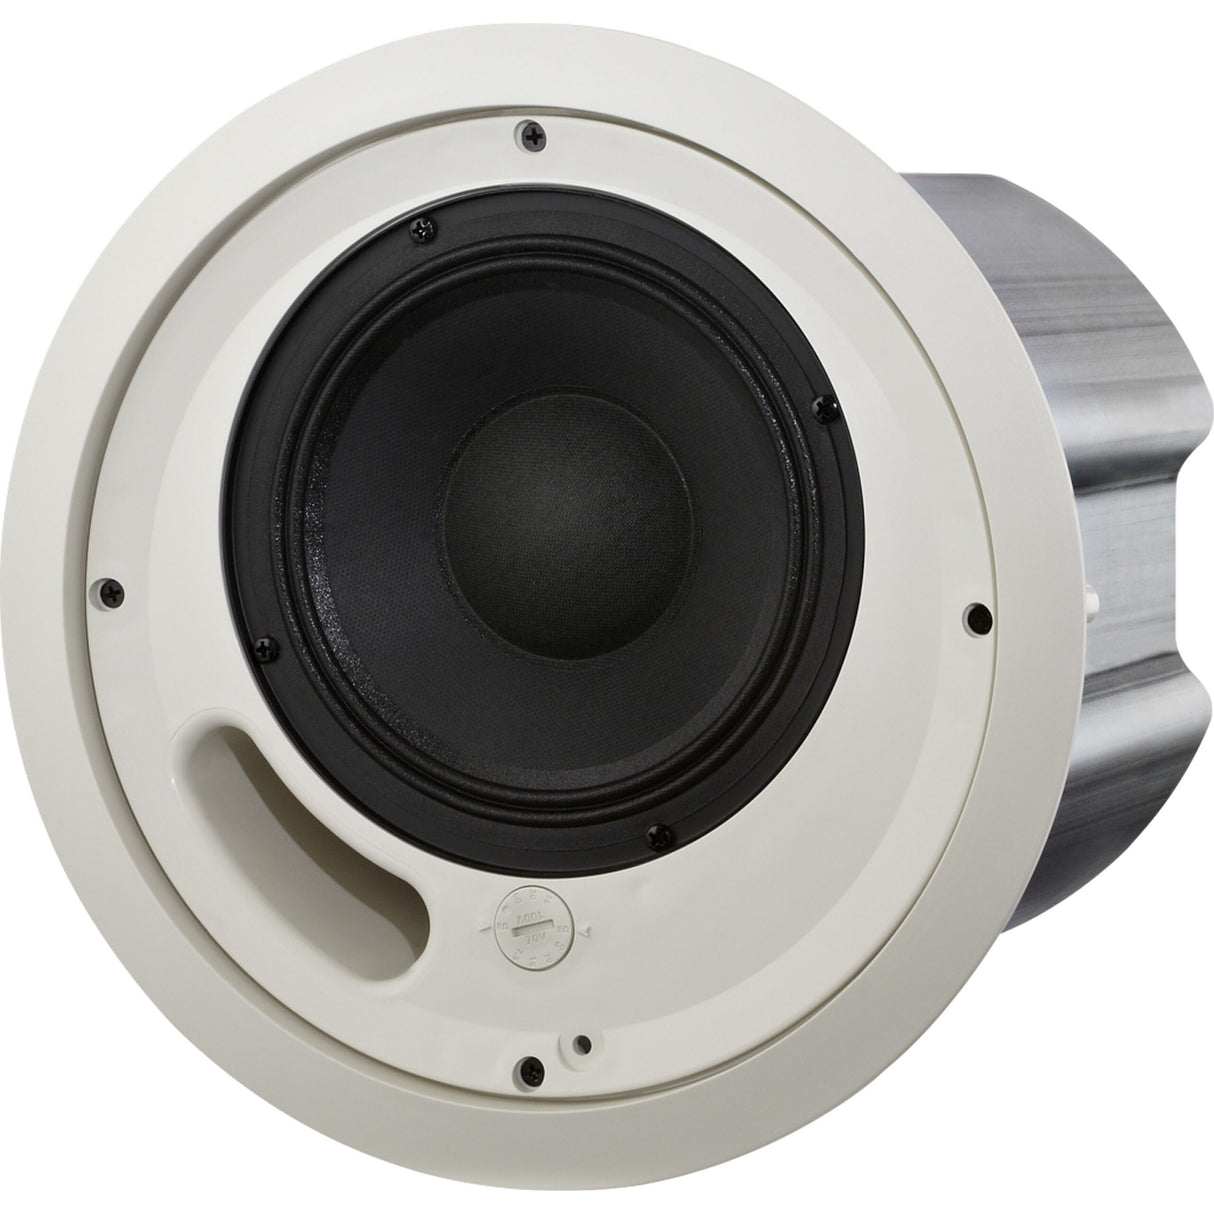 Electro-Voice EVID-PC6.2 6.5-Inch 2-Way Ceiling Speaker, White, Pair